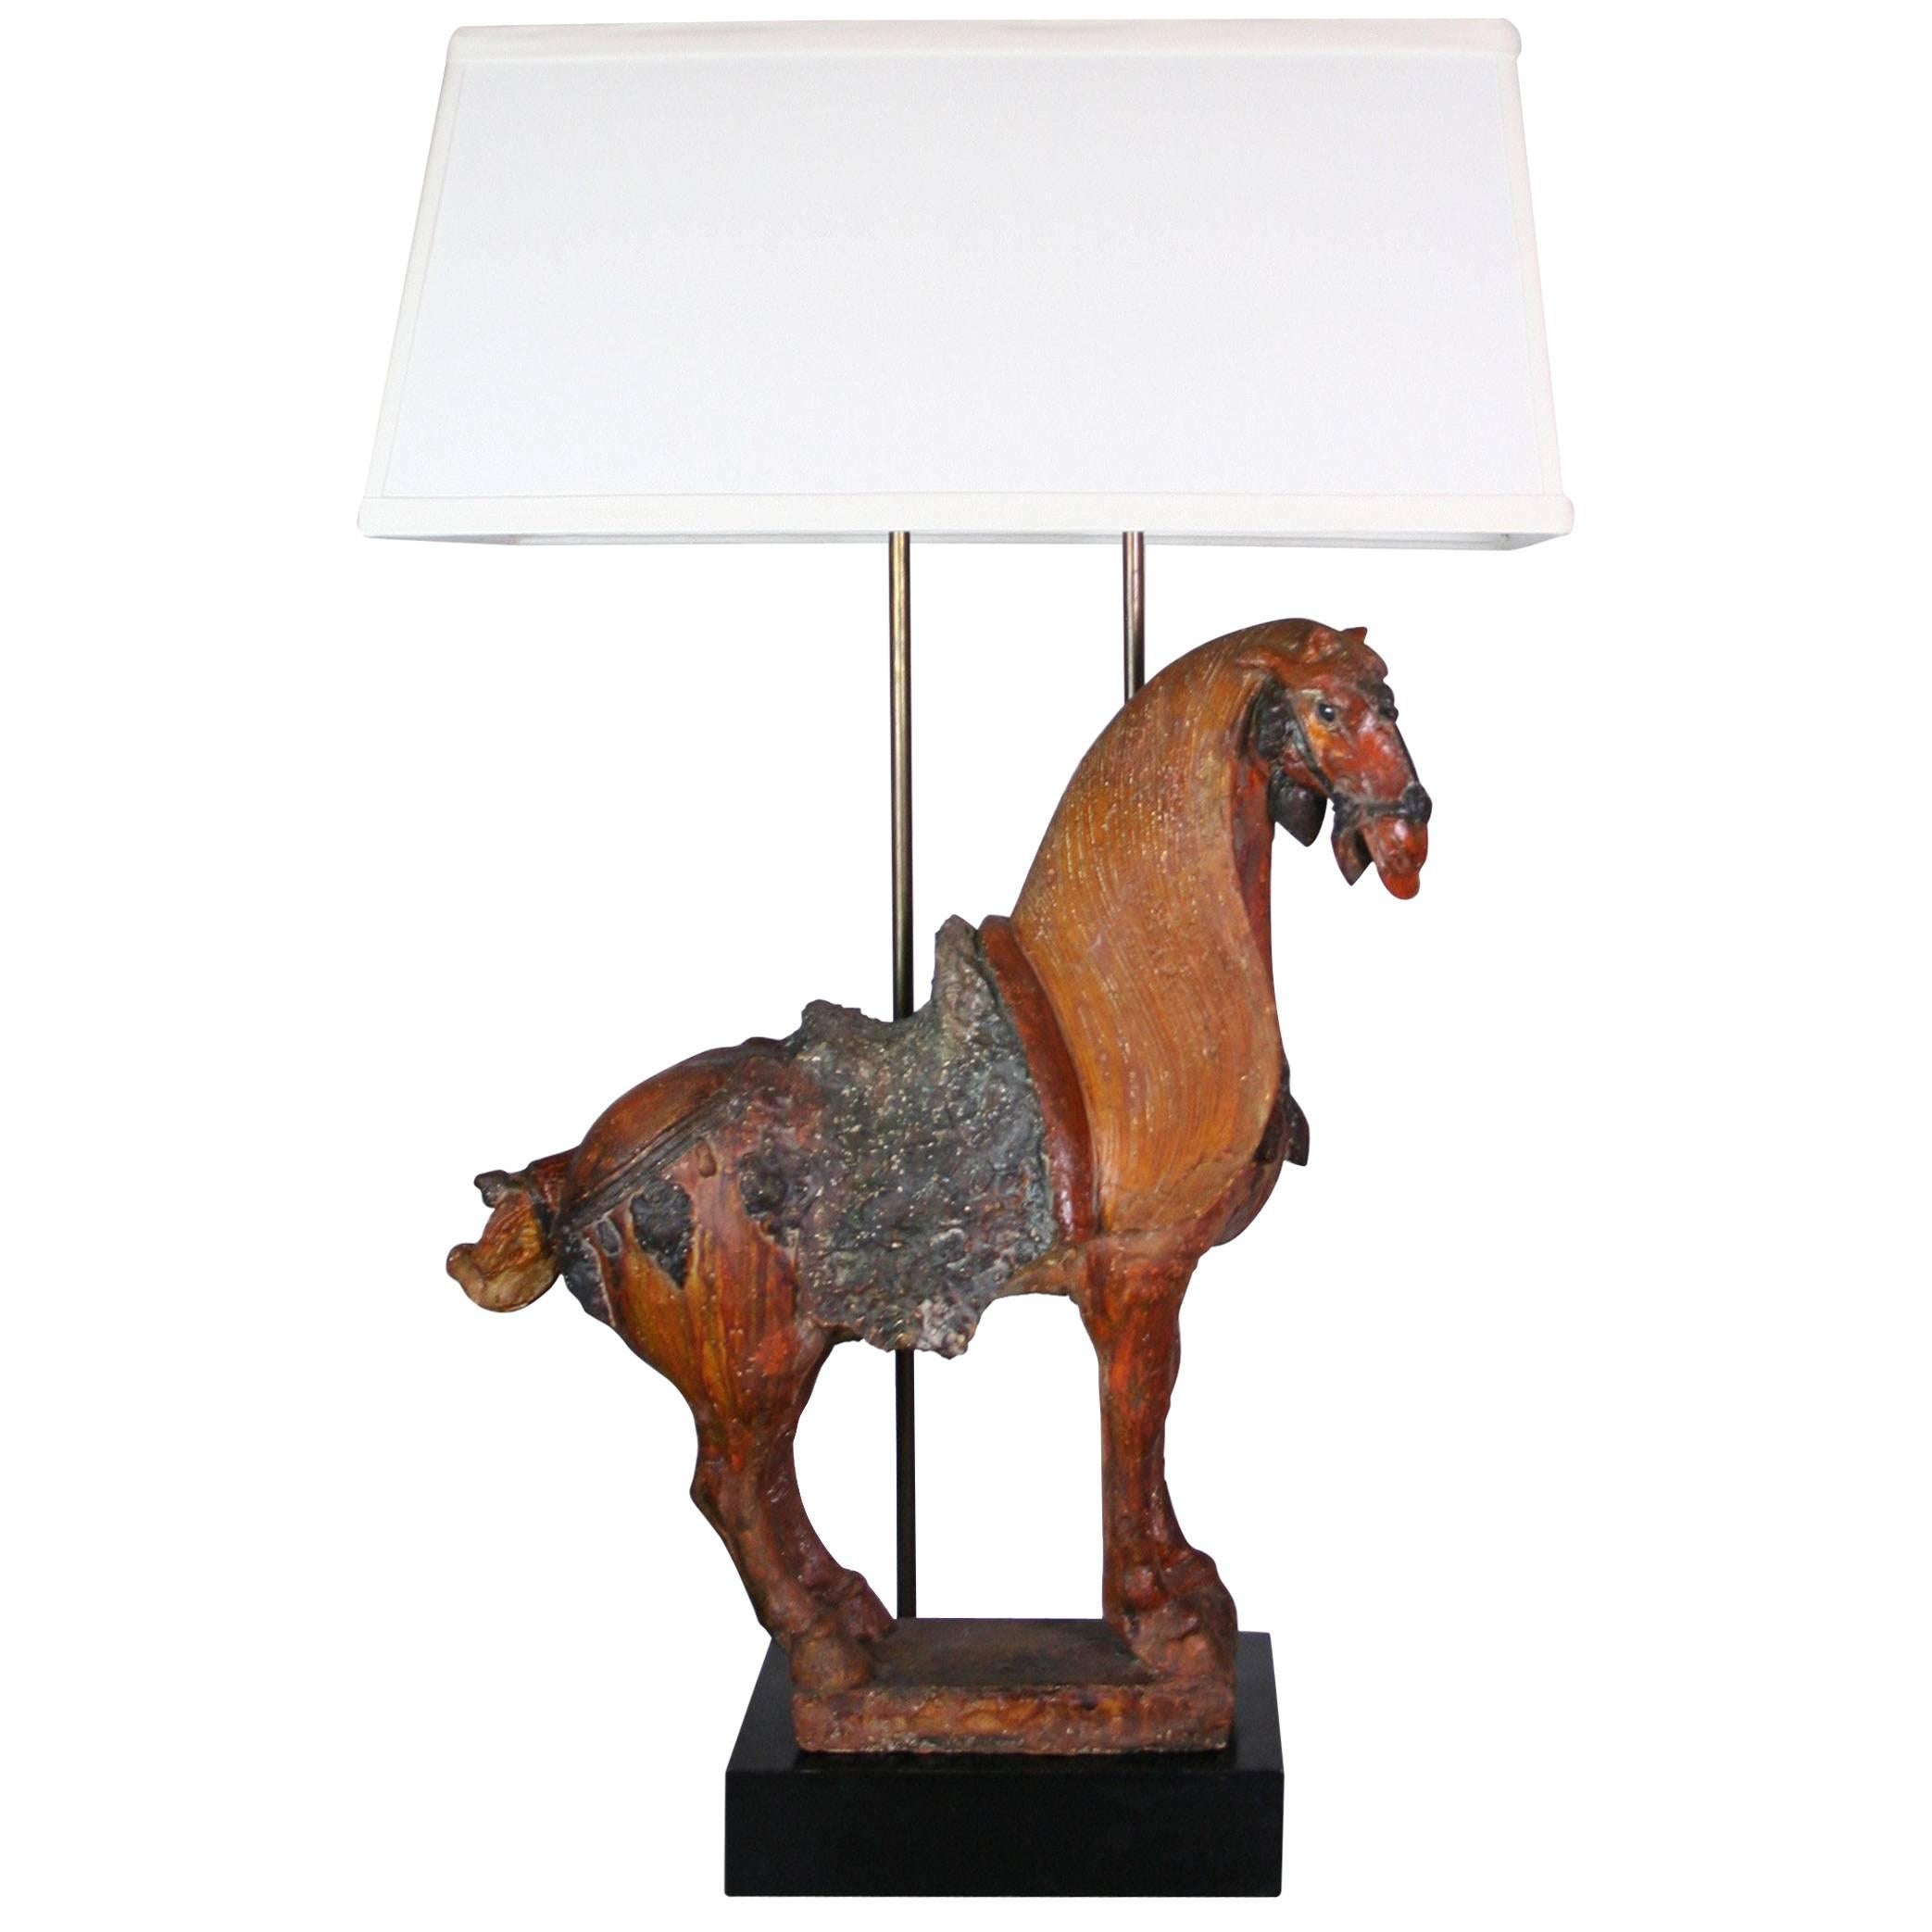 Monumental Tang Dynasty Style Horse Mounted as a Lamp